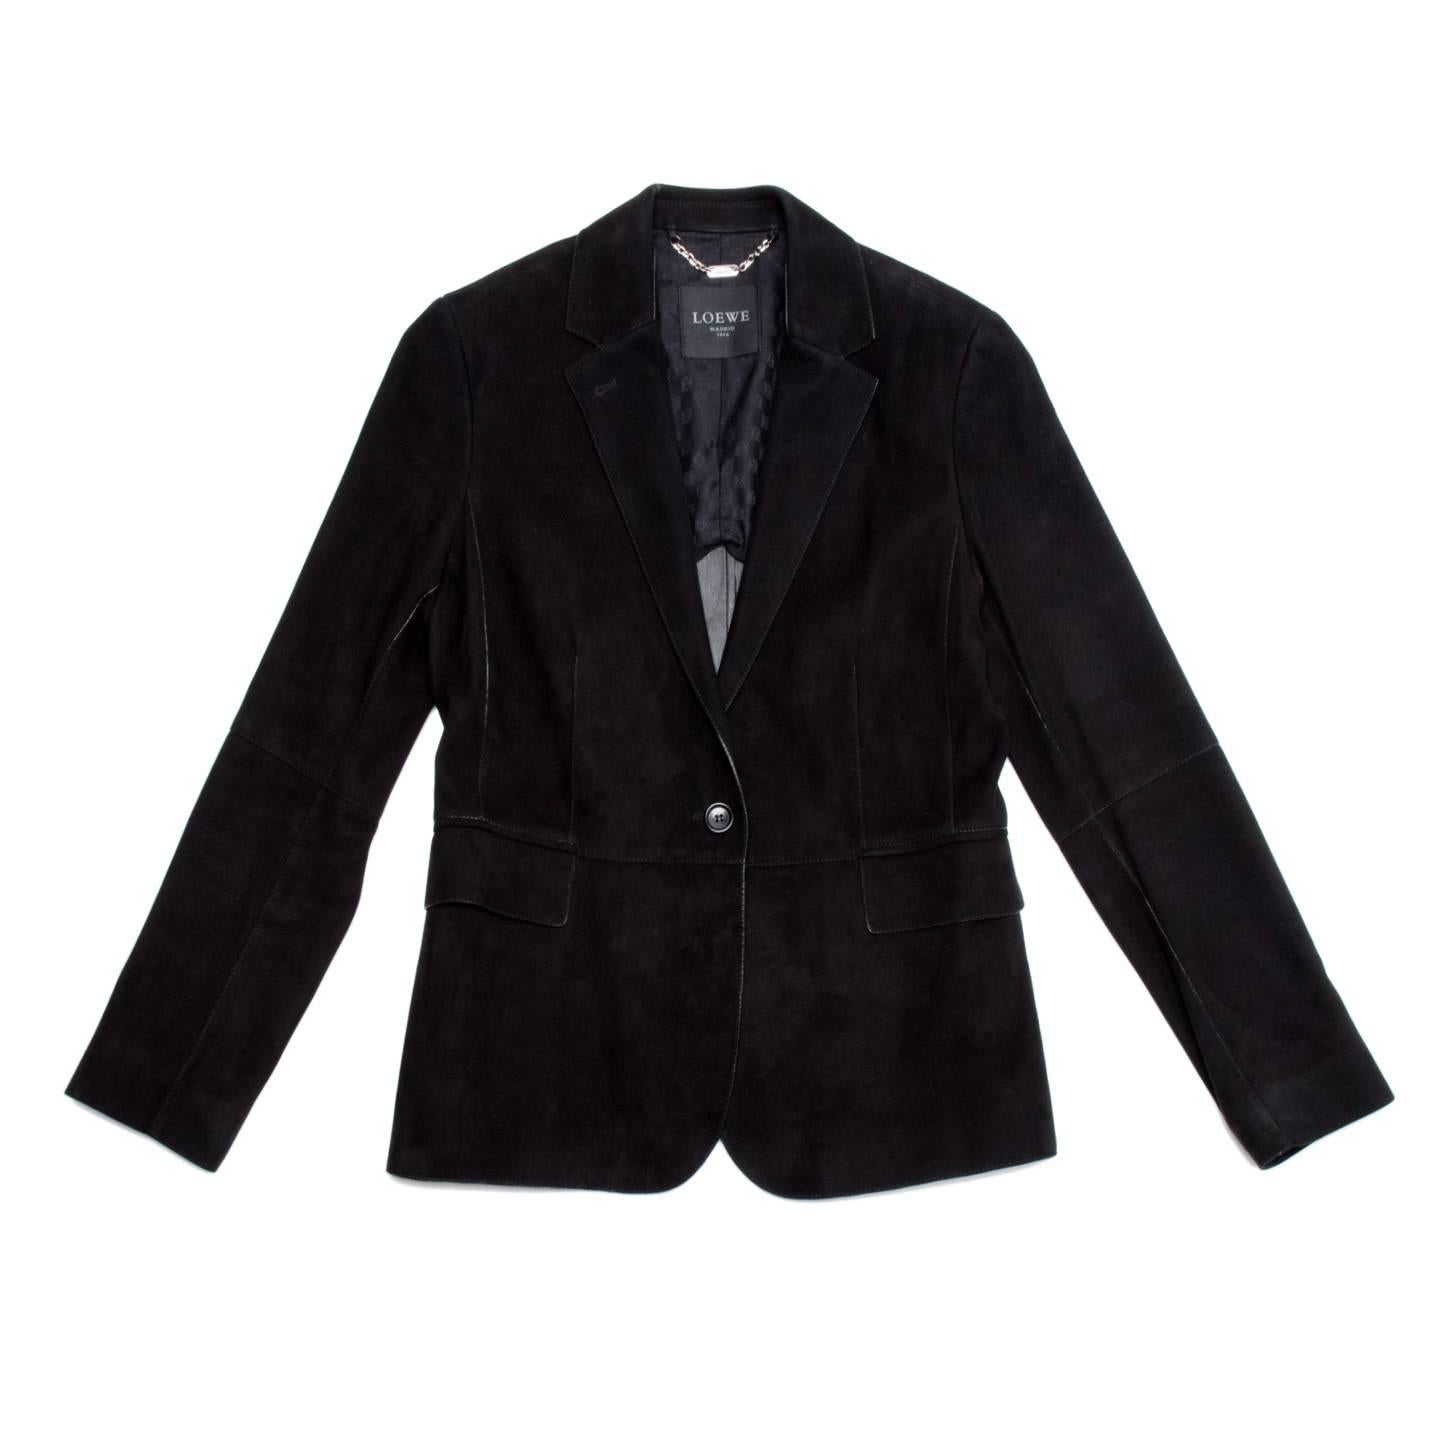 Black soft lamb suede blazer with a single button closure and single back vent. The jacket is made of regular rectangular panels with two flap pockets at waist. Made in Spain.

Size  44 French sizing

Condition  Excellent: worn a few times
